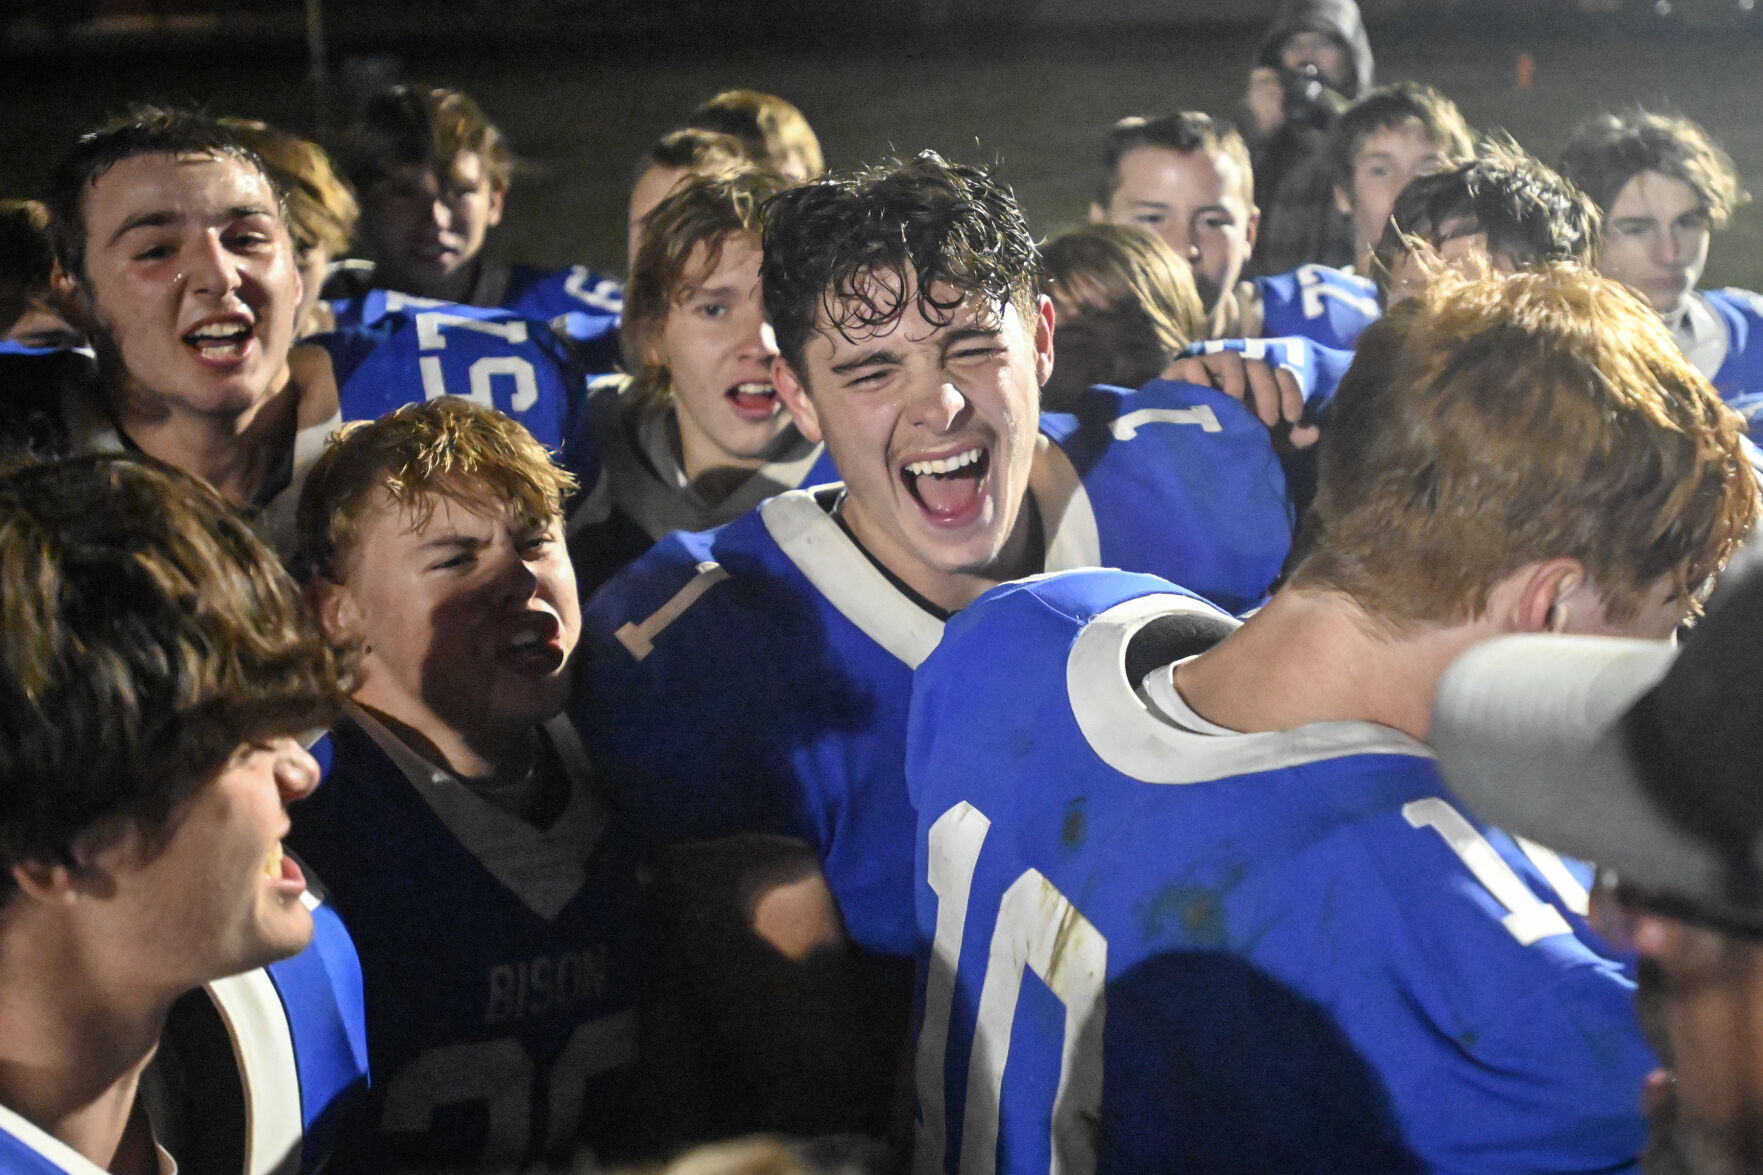 Hot Springs Bison Power Their Way to State Championship after 20-Year Wait